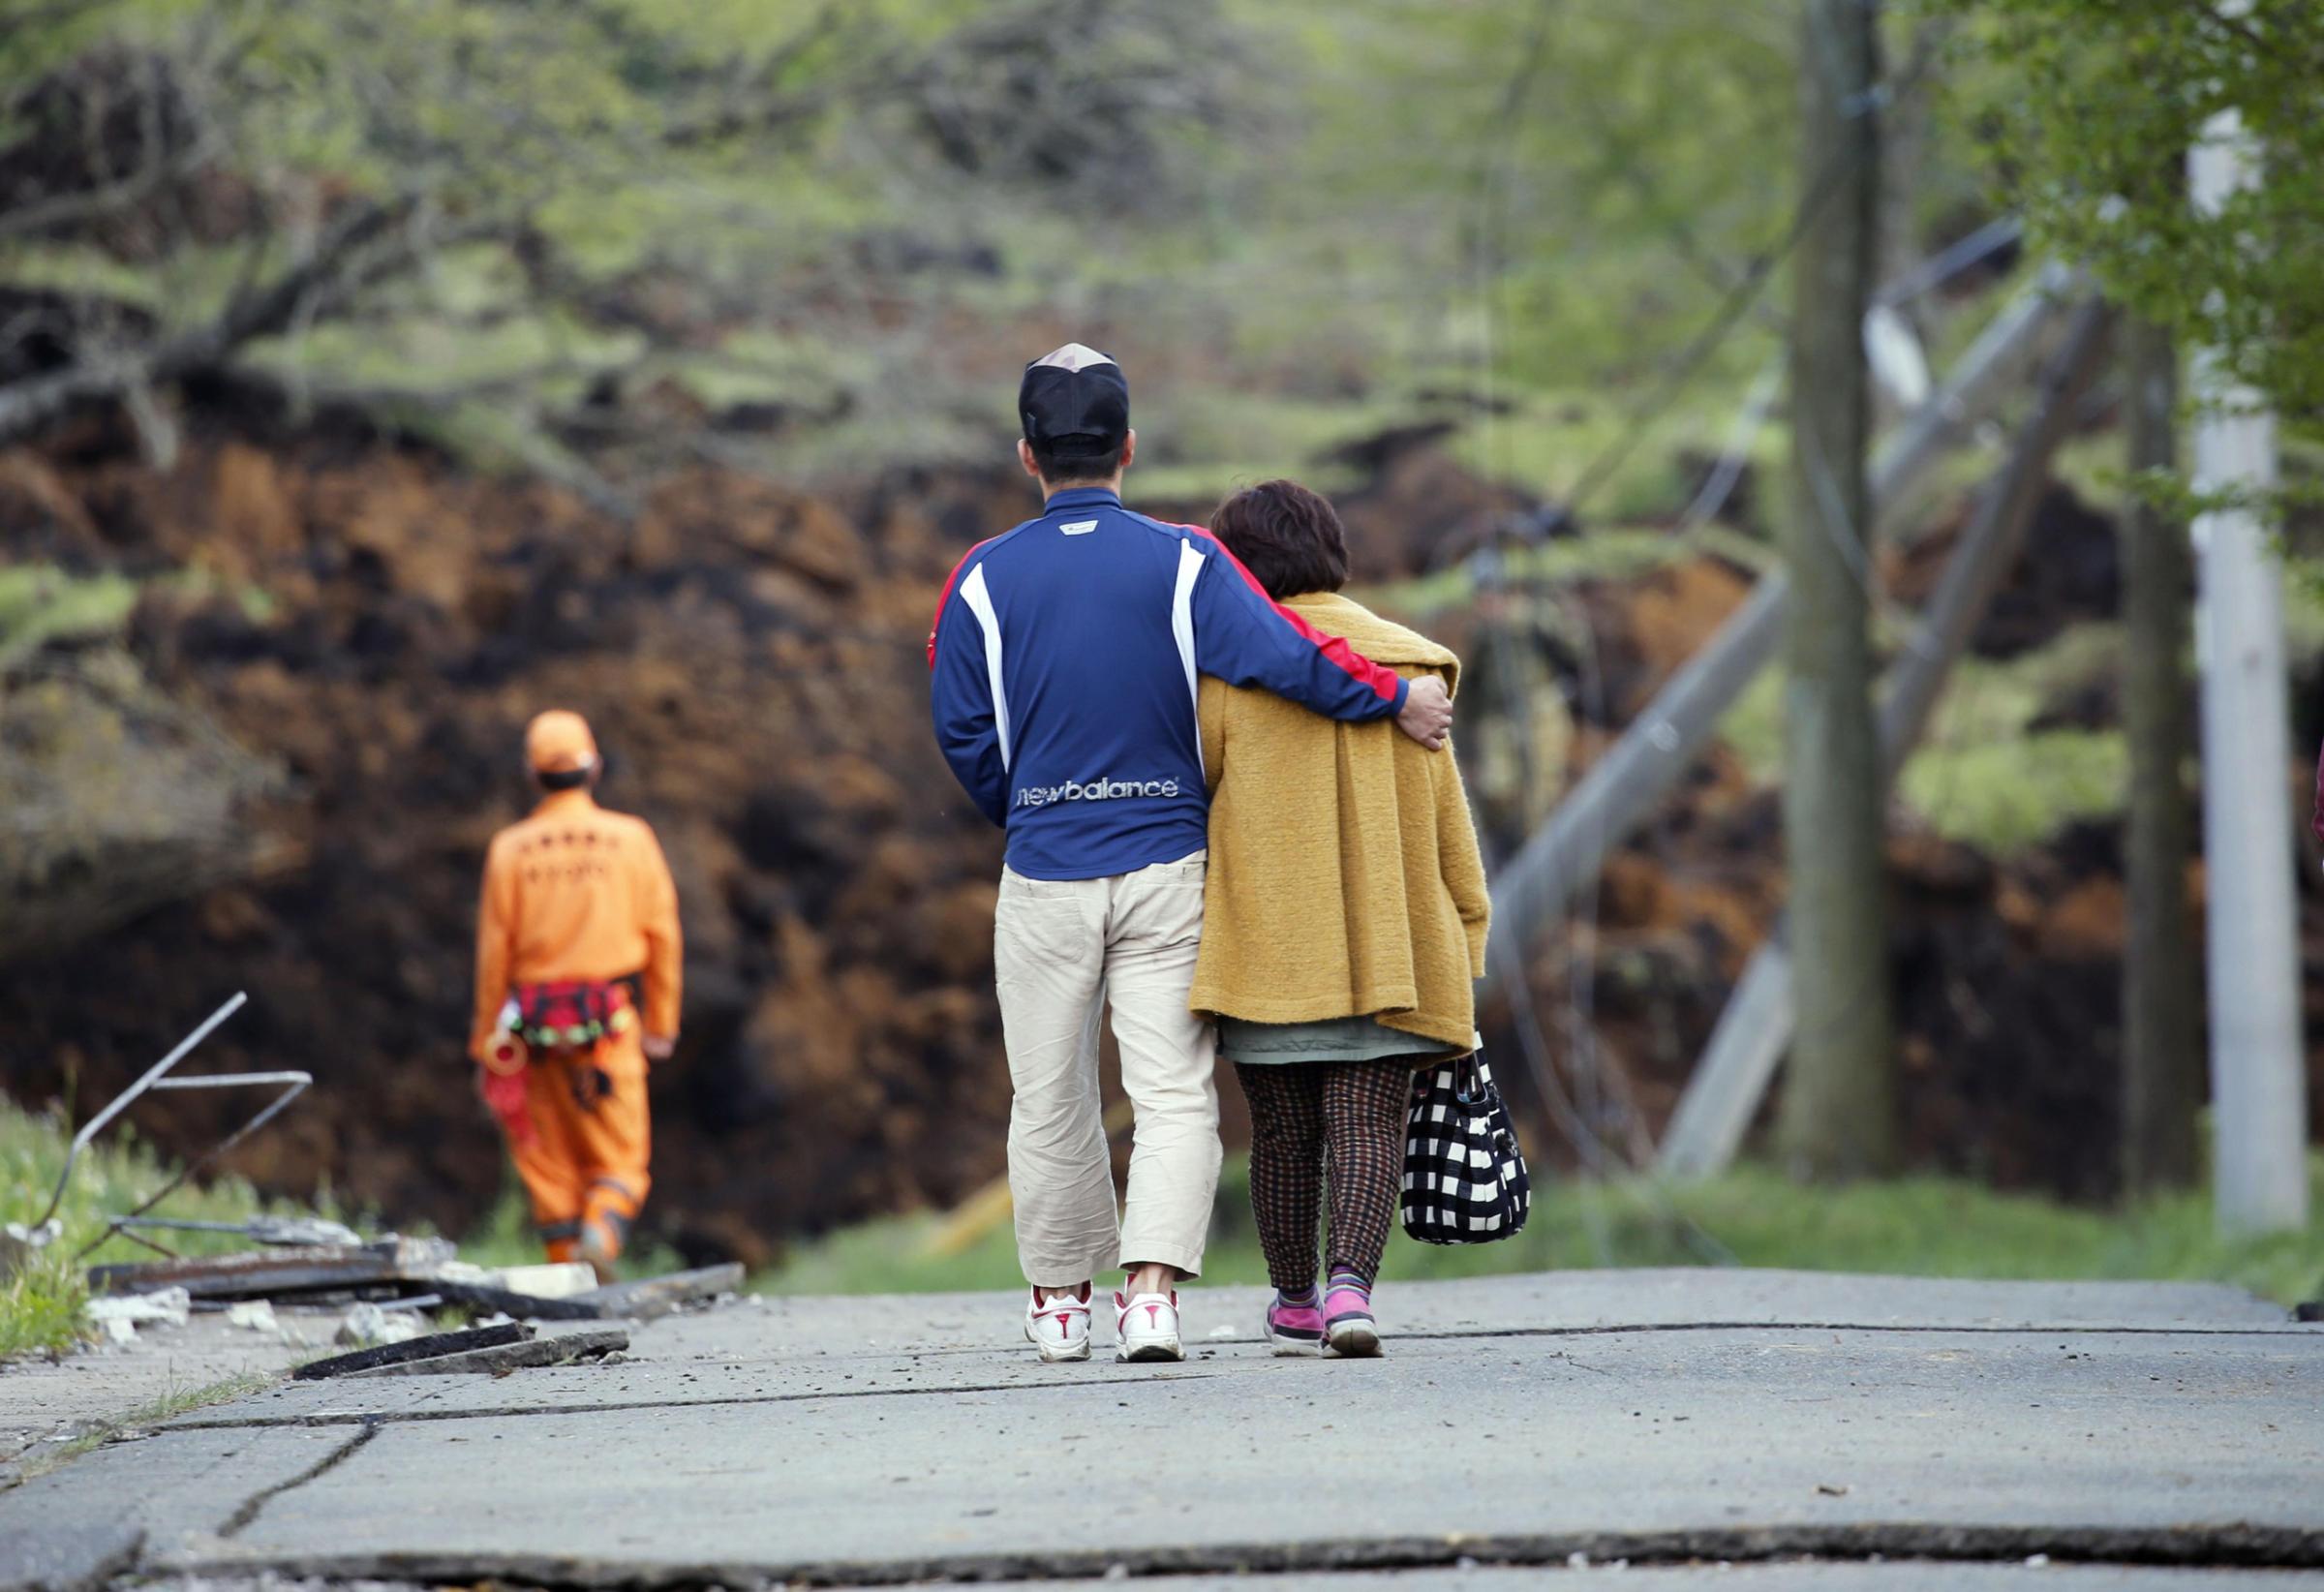 A man hugs his mother as they leave their house buried in a landslide caused by earthquakes in Minamiaso, Kumamoto prefecture, Japan, Sunday, April 17, 2016. Two nights of increasingly terrifying earthquakes flattened houses and triggered major landslides in southern Japan. (Yuki Sato/Kyodo News via AP) JAPAN OUT, MANDATORY CREDIT